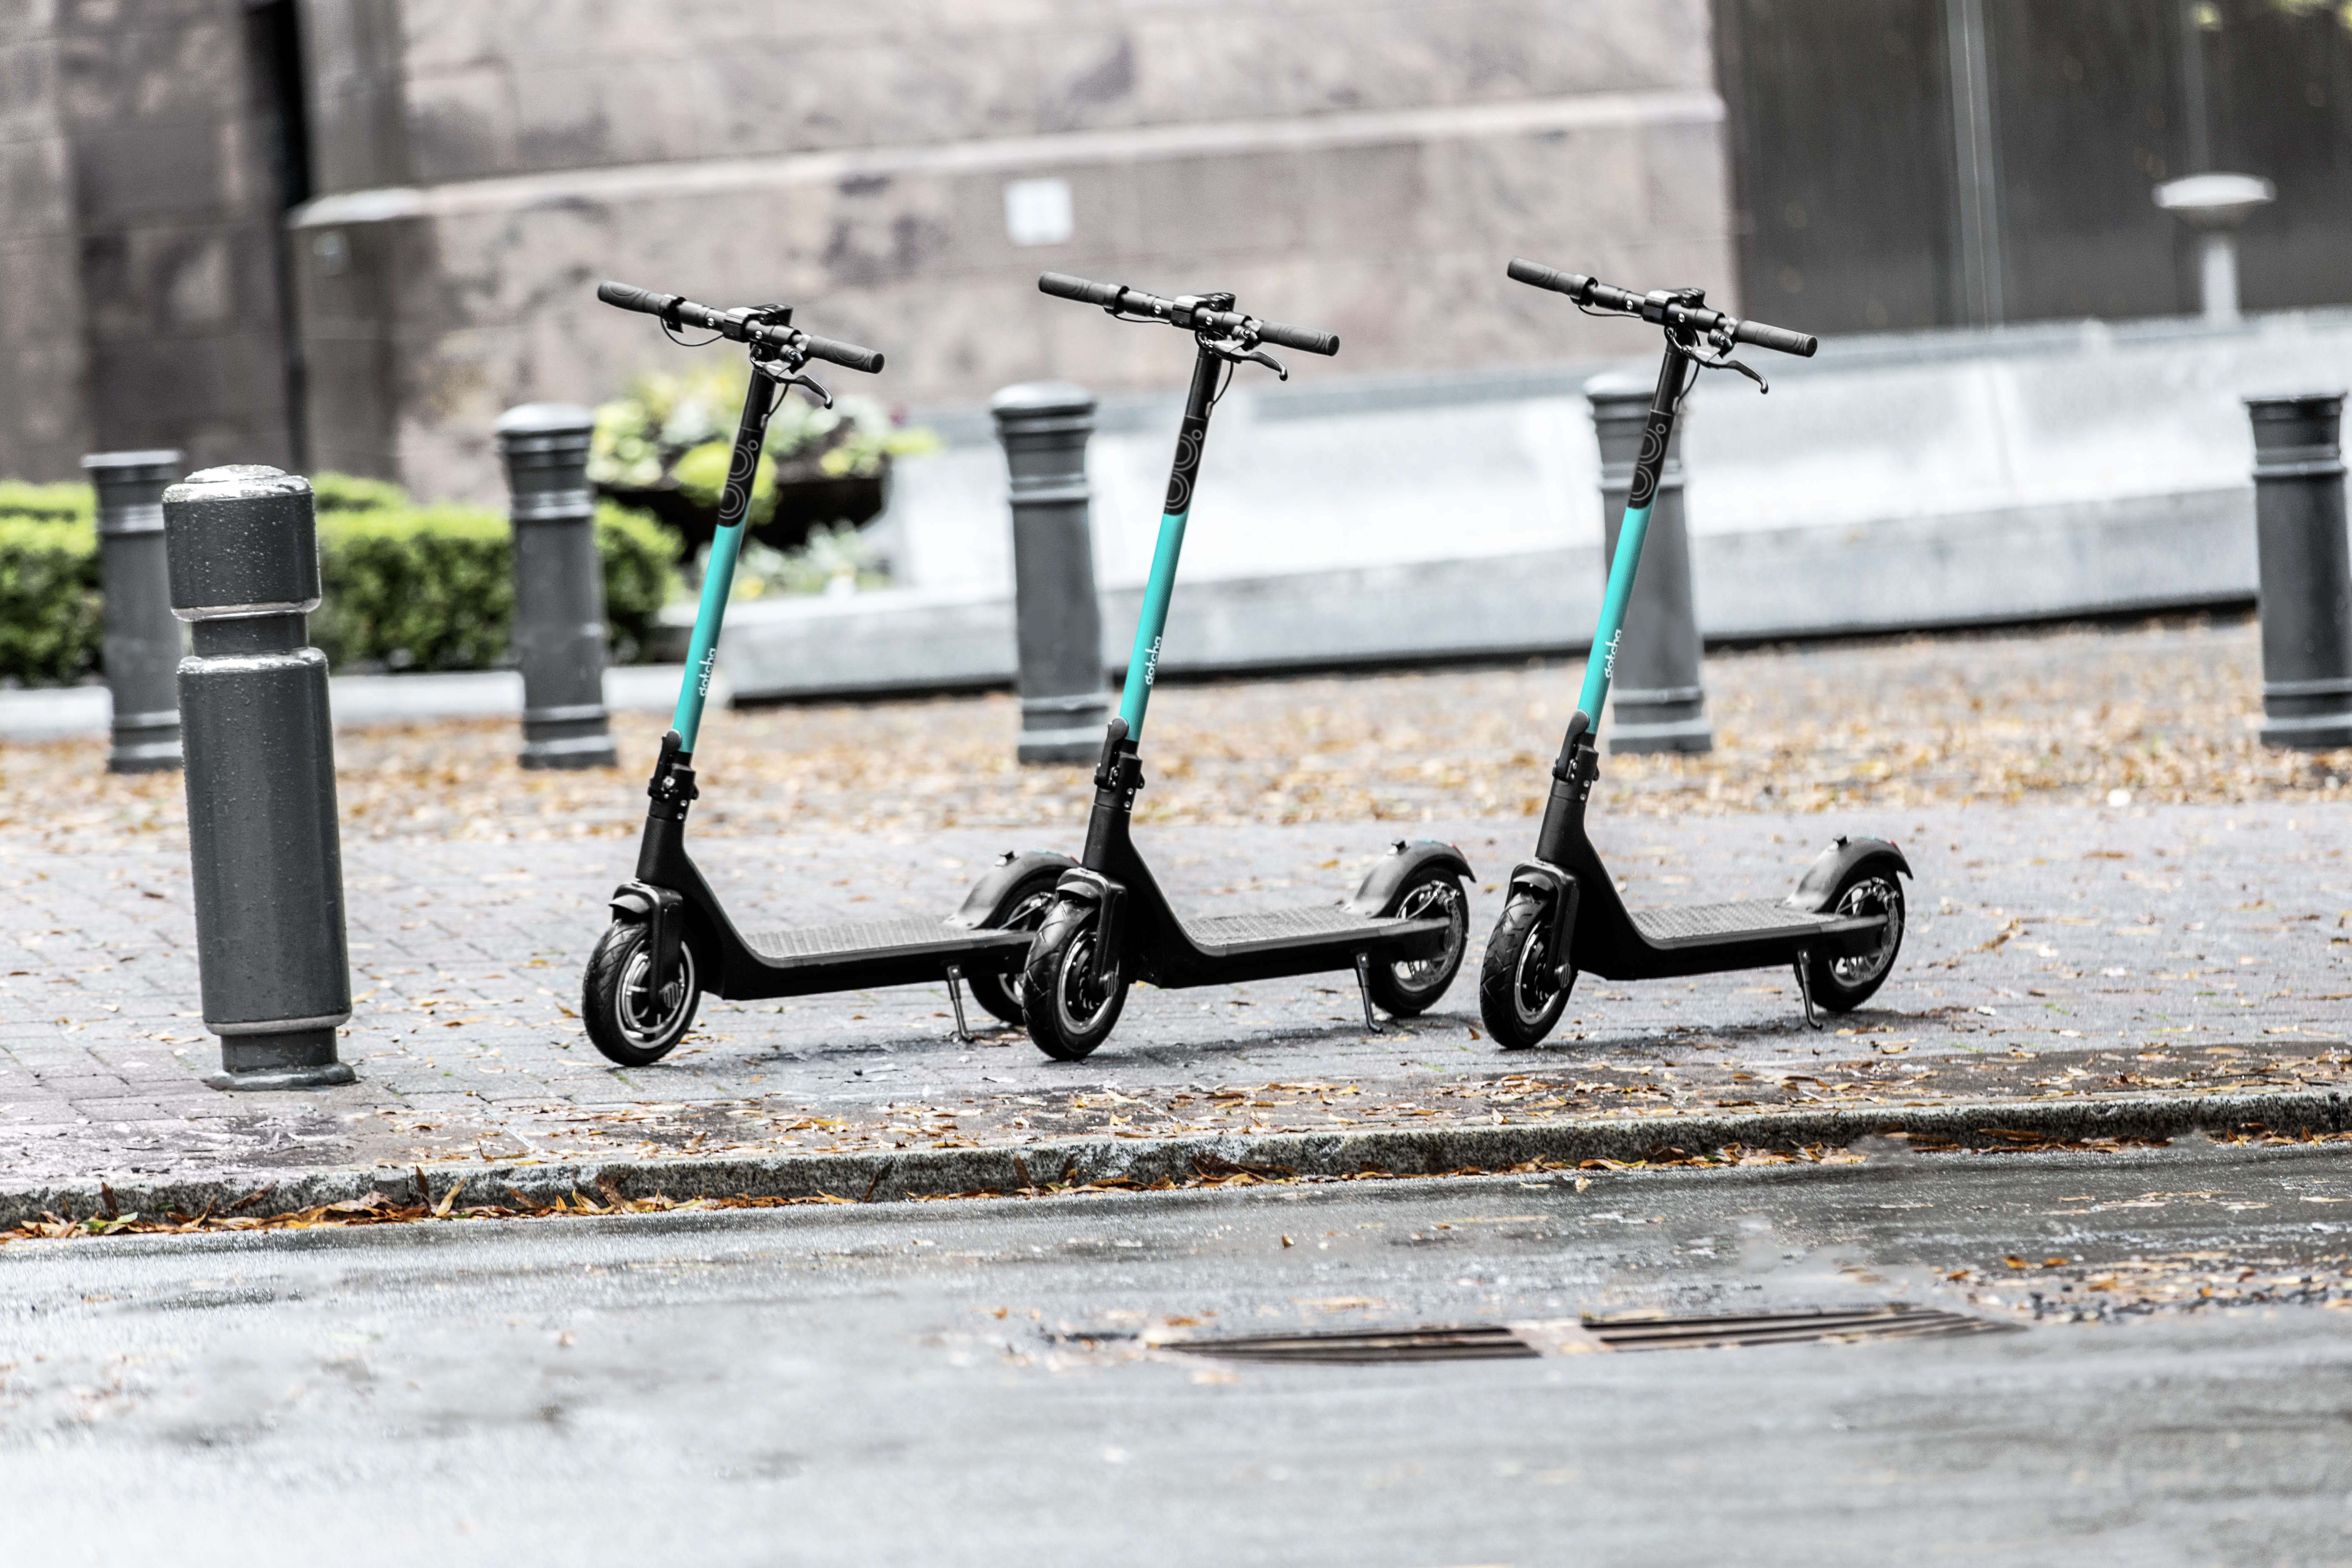 instinct Occupy Vague So long, scooters. Bolt Mobility leaves Mobile with few reported  incidences, some lingering concerns - al.com